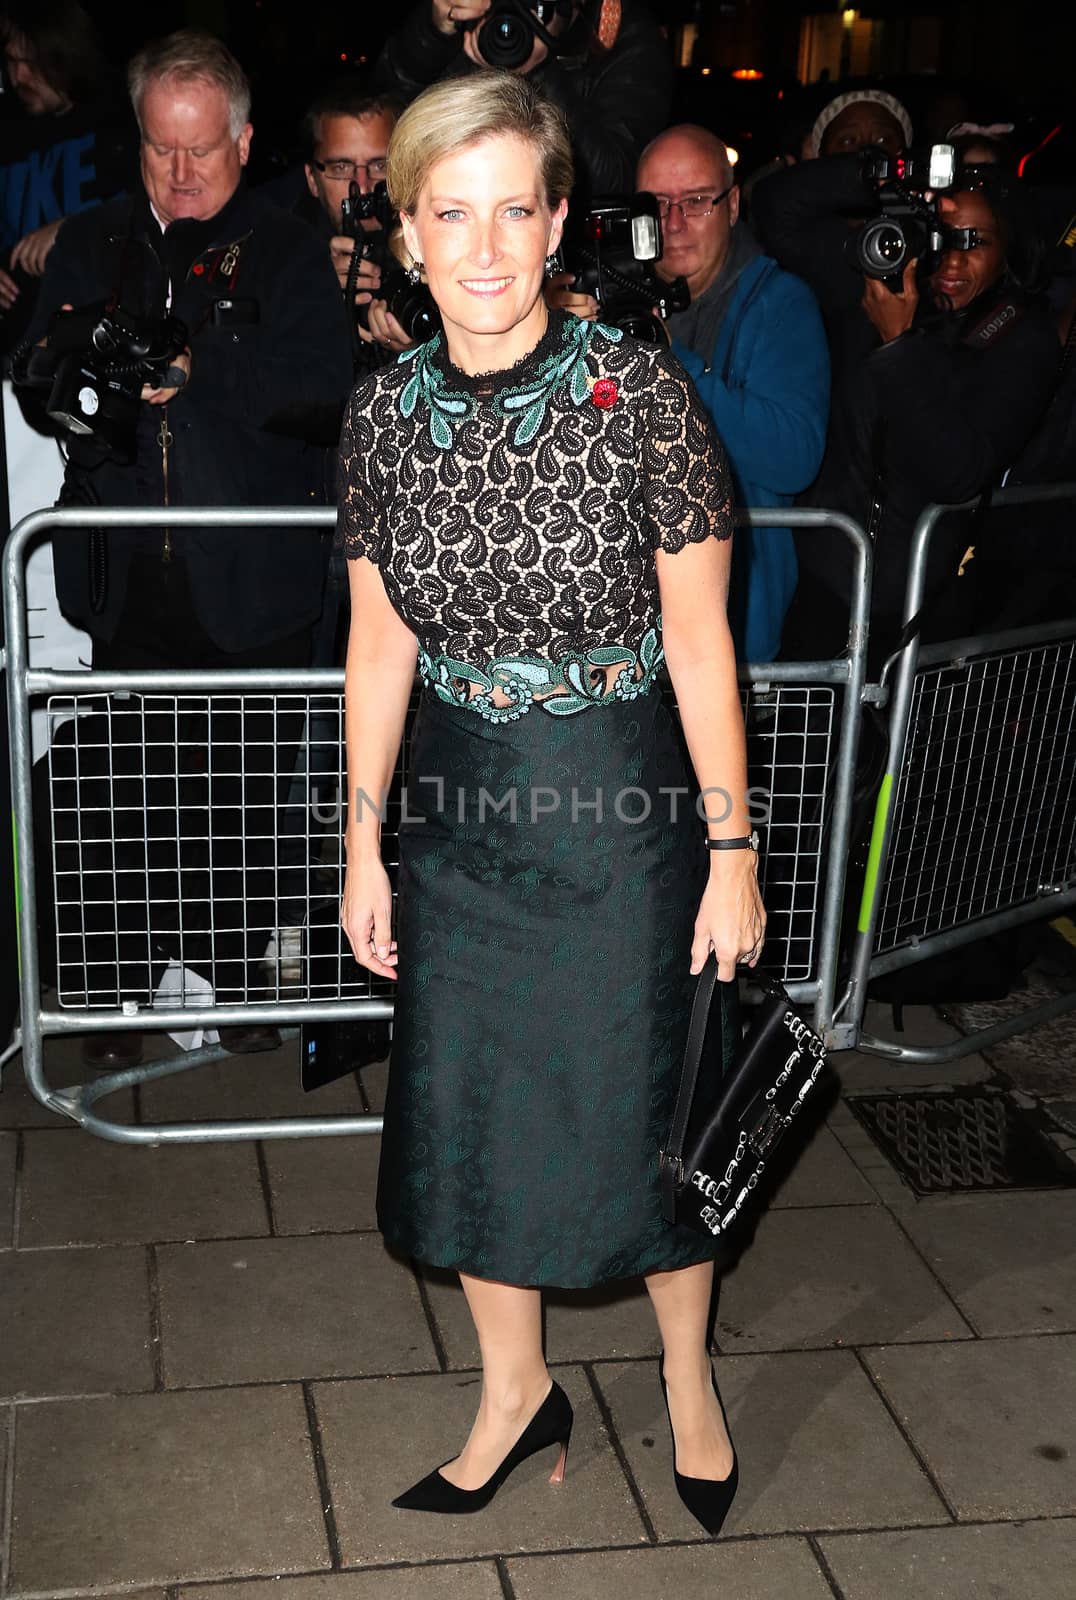 UNITED KINGDOM, London: Sophie Countess Of Wessex poses during the Harper's Bazaar Women of the Year Awards at Claridge's, in London, on November 3, 2015.